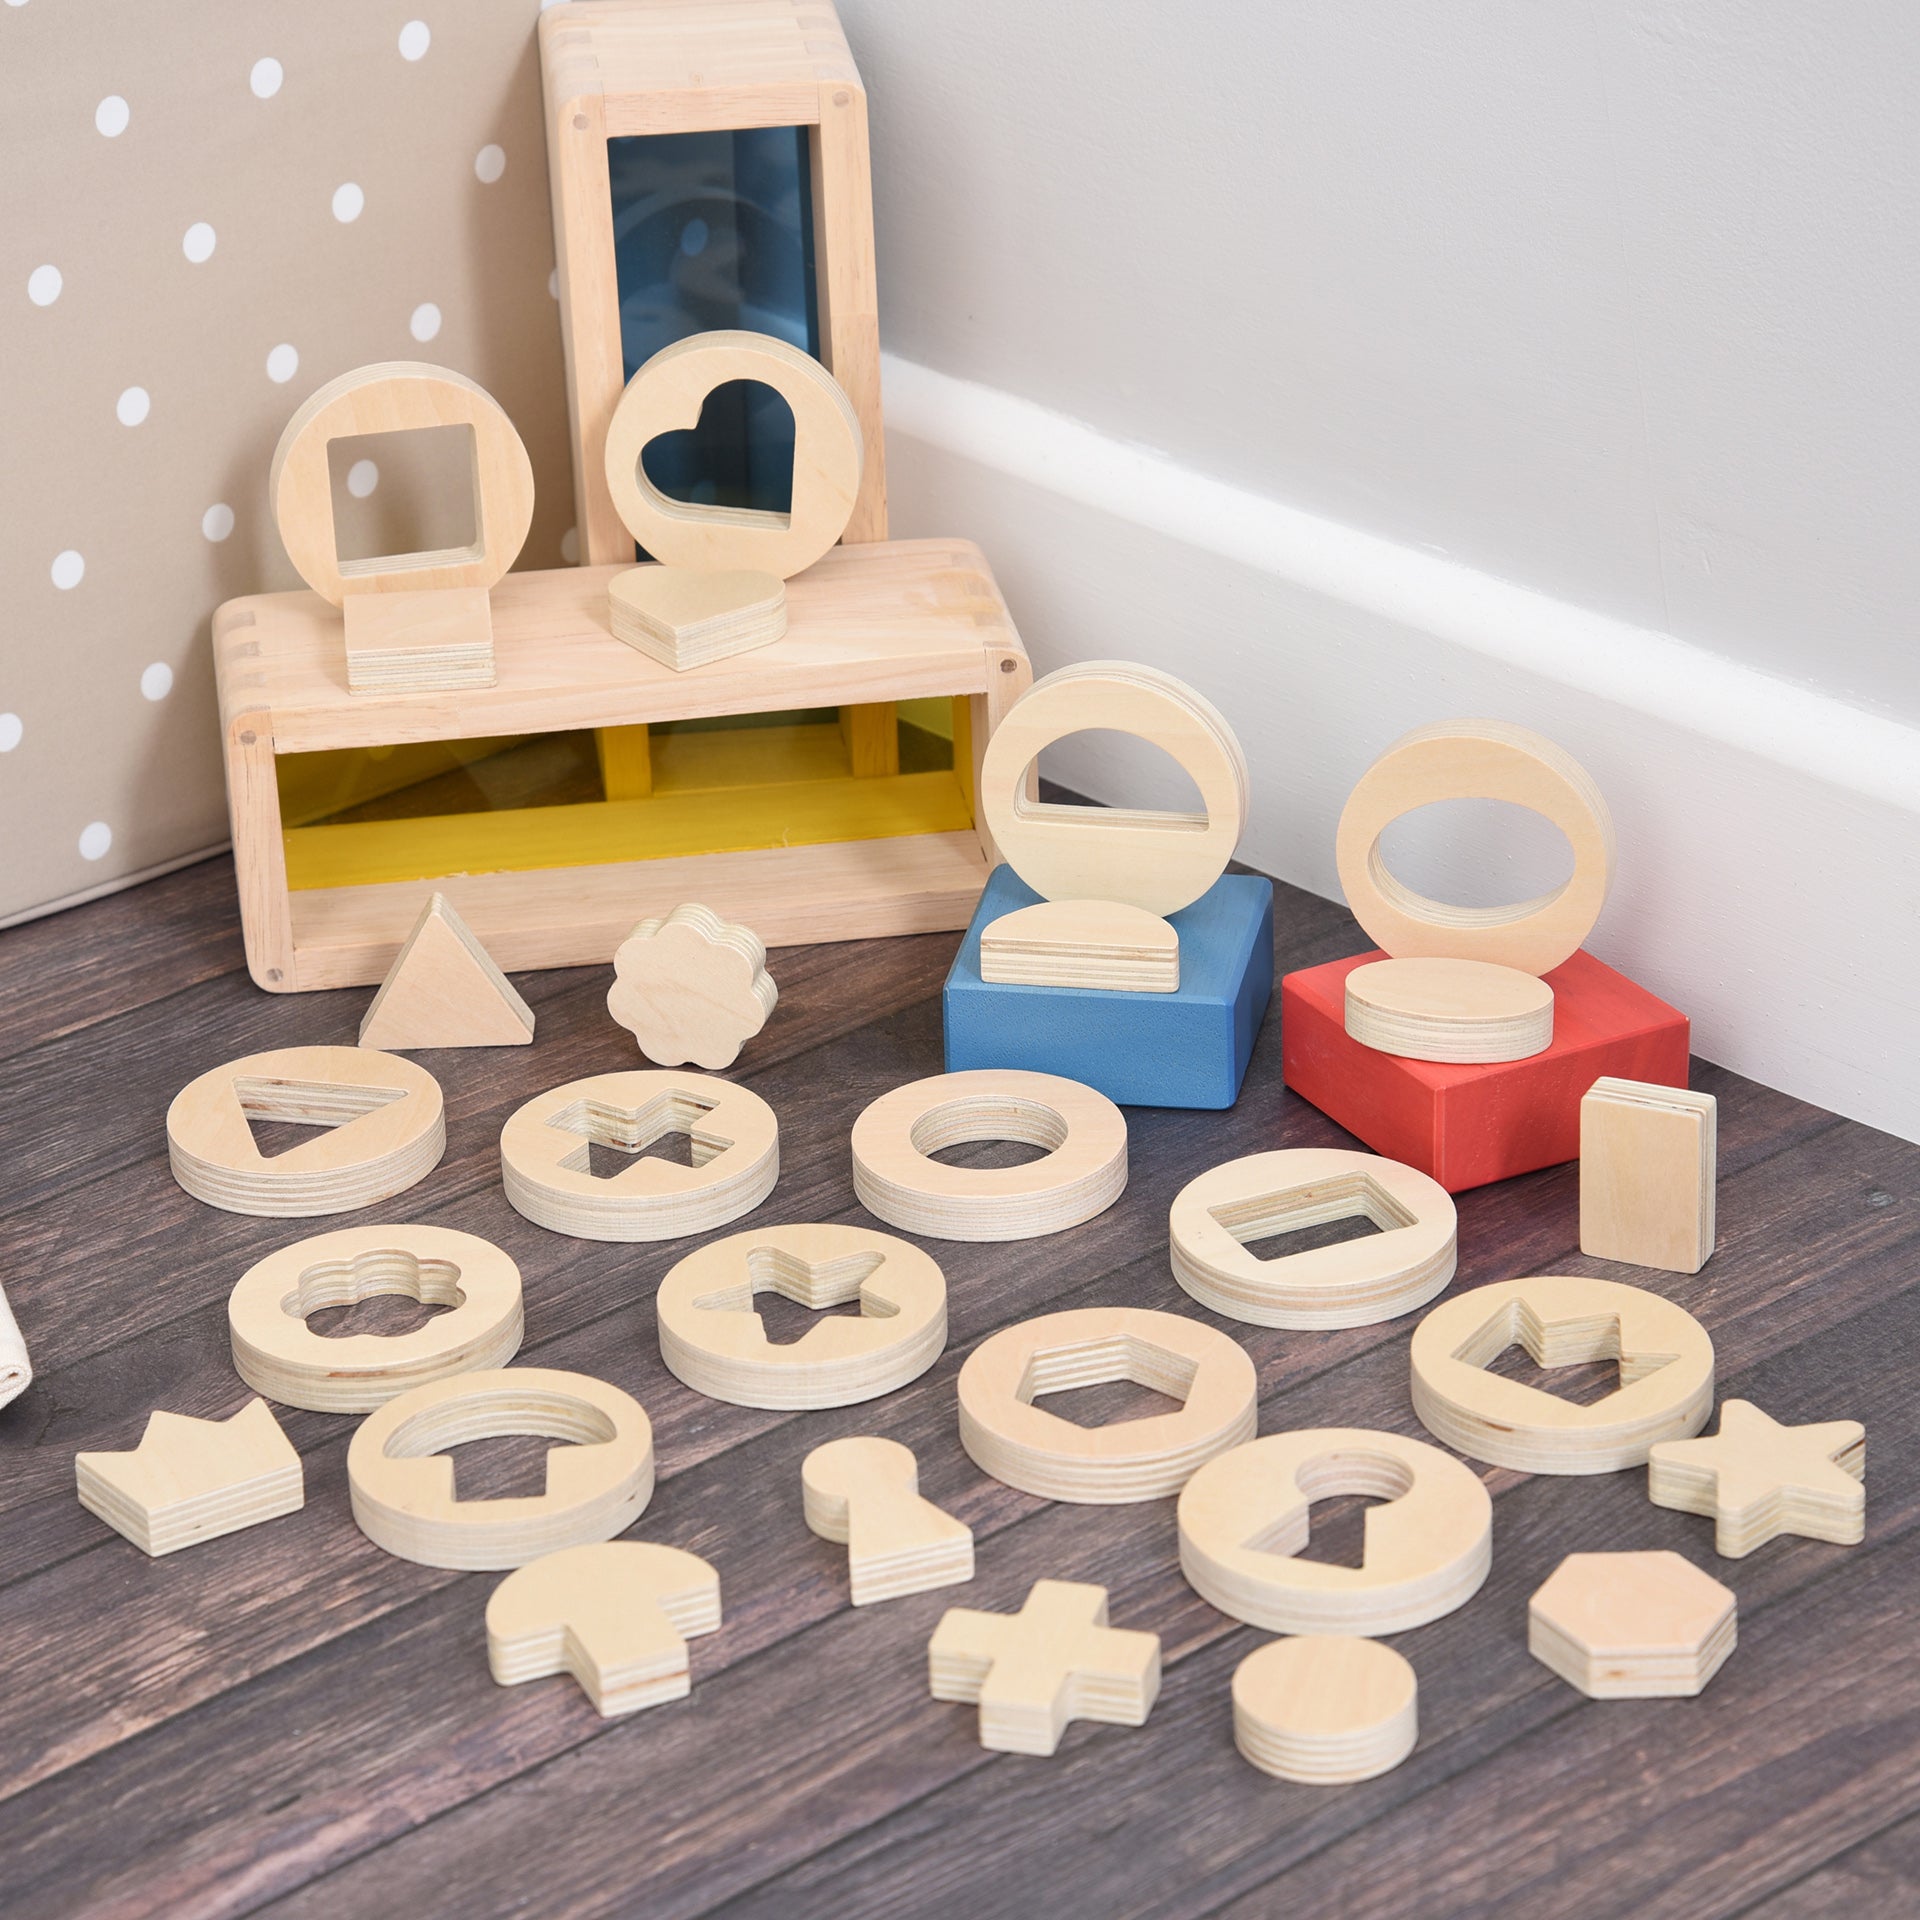 Inside Outside Wooden Shapes, Our TickiT® Inside Outside Wooden Shapes provide exciting and stimulating fun for your child to explore shape sorting and puzzle solving. A set of 14 smooth and tactile wooden discs, each with a different shape cut out and nested inside, which your child can take out for tracing, drawing around or pattern making. Each 1.2cm thick removable shape is chunky and easy for small hands to manipulate. With 7 geometric shapes (circle, oval, semicircle, triangle, square, rectangle and h